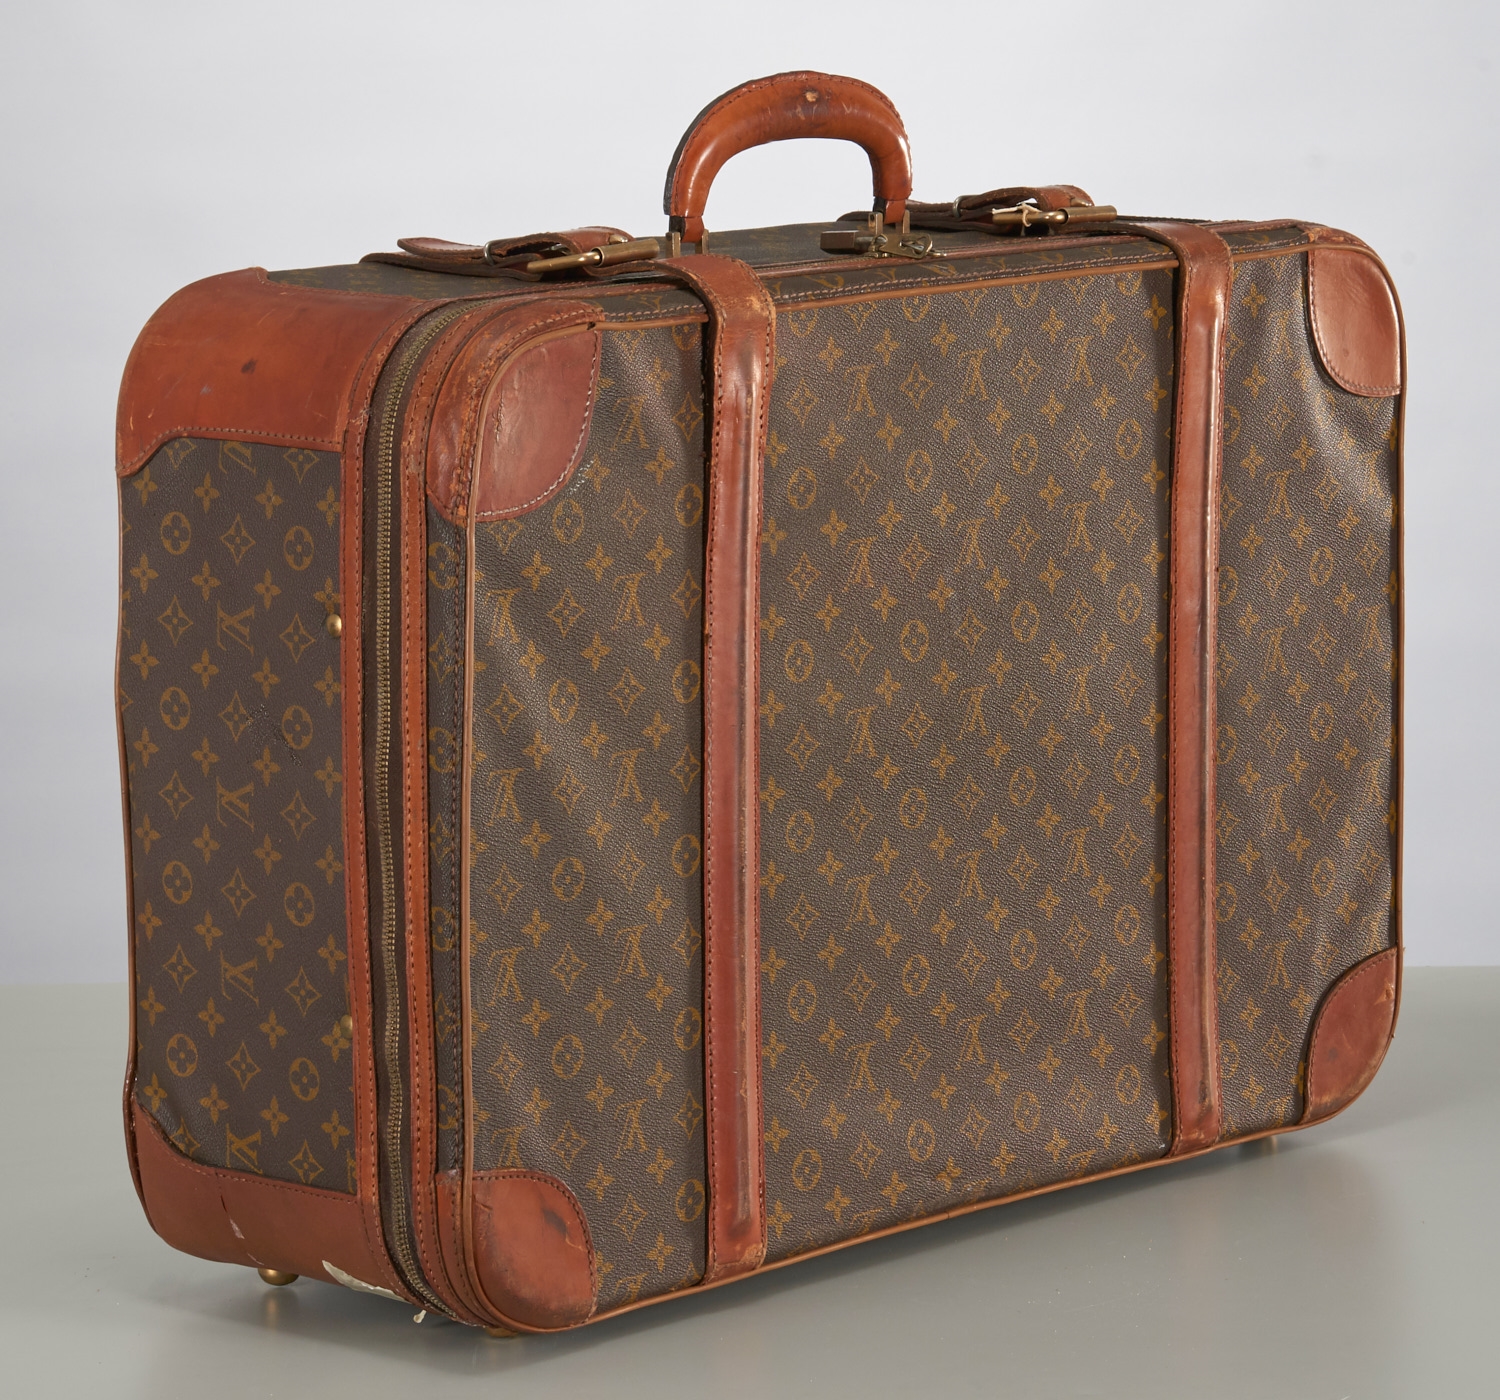 Sold at Auction: Louis Vuitton, Louis Vuitton Soft-Sided Leather Suitcase